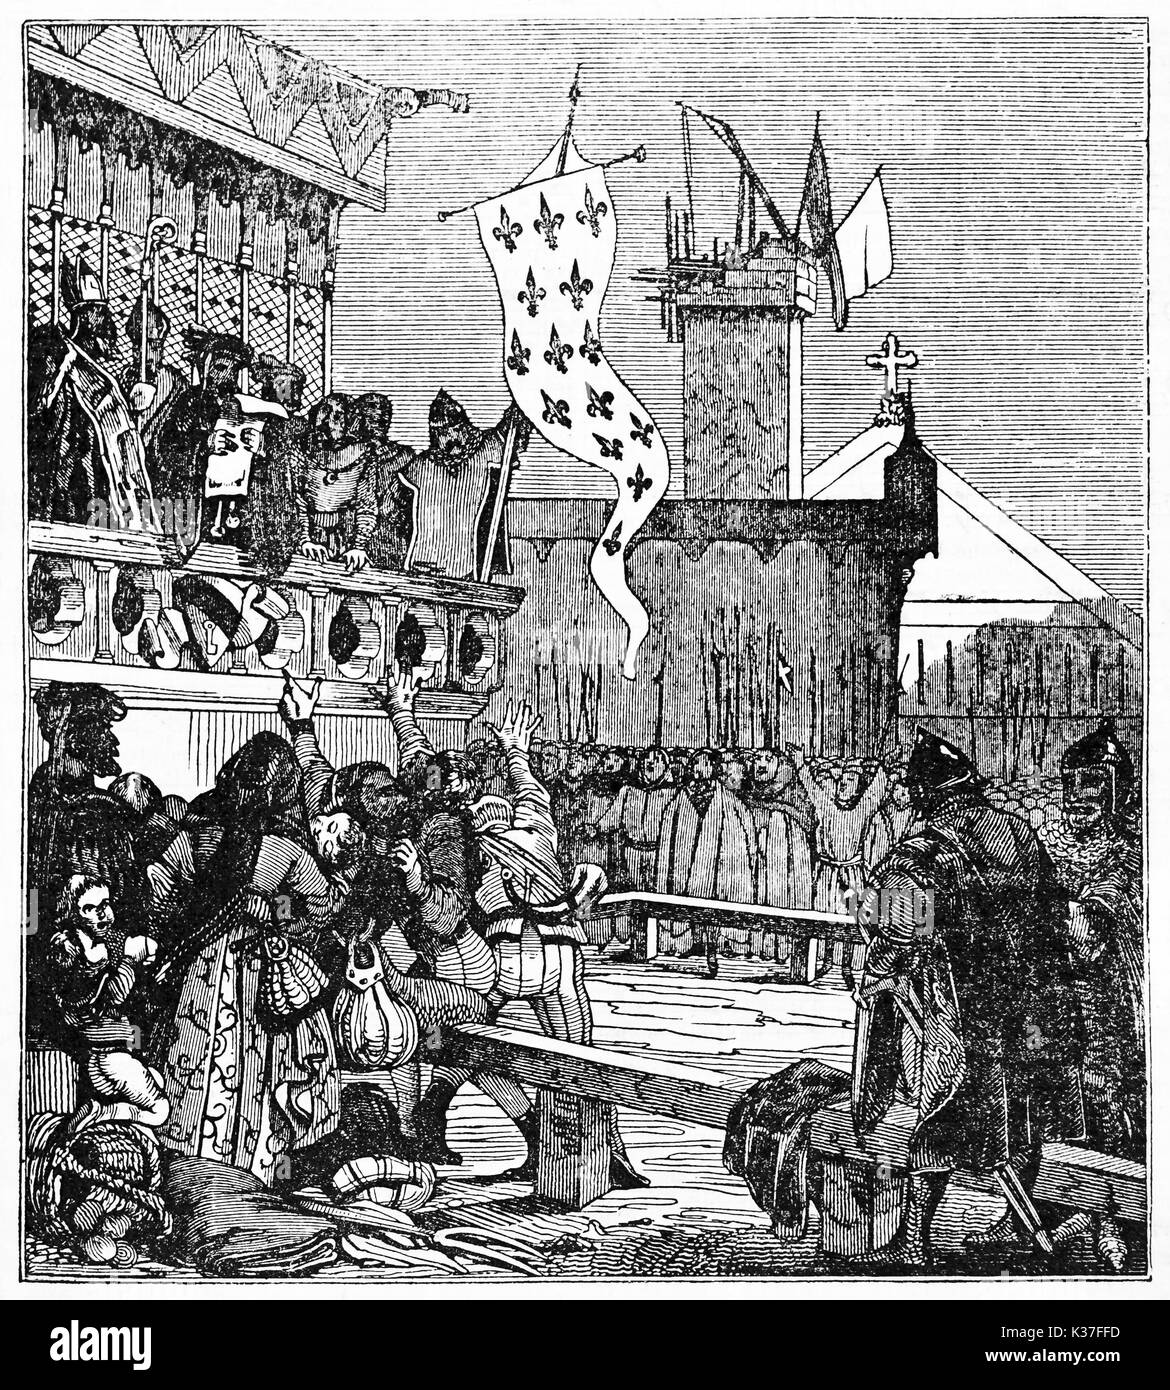 Public reading of a document by civil authority in front of a crowd of medieval people. Created Old Illustration by Jackson publ. on Magasin Pittoresque Paris 1834 Stock Photo